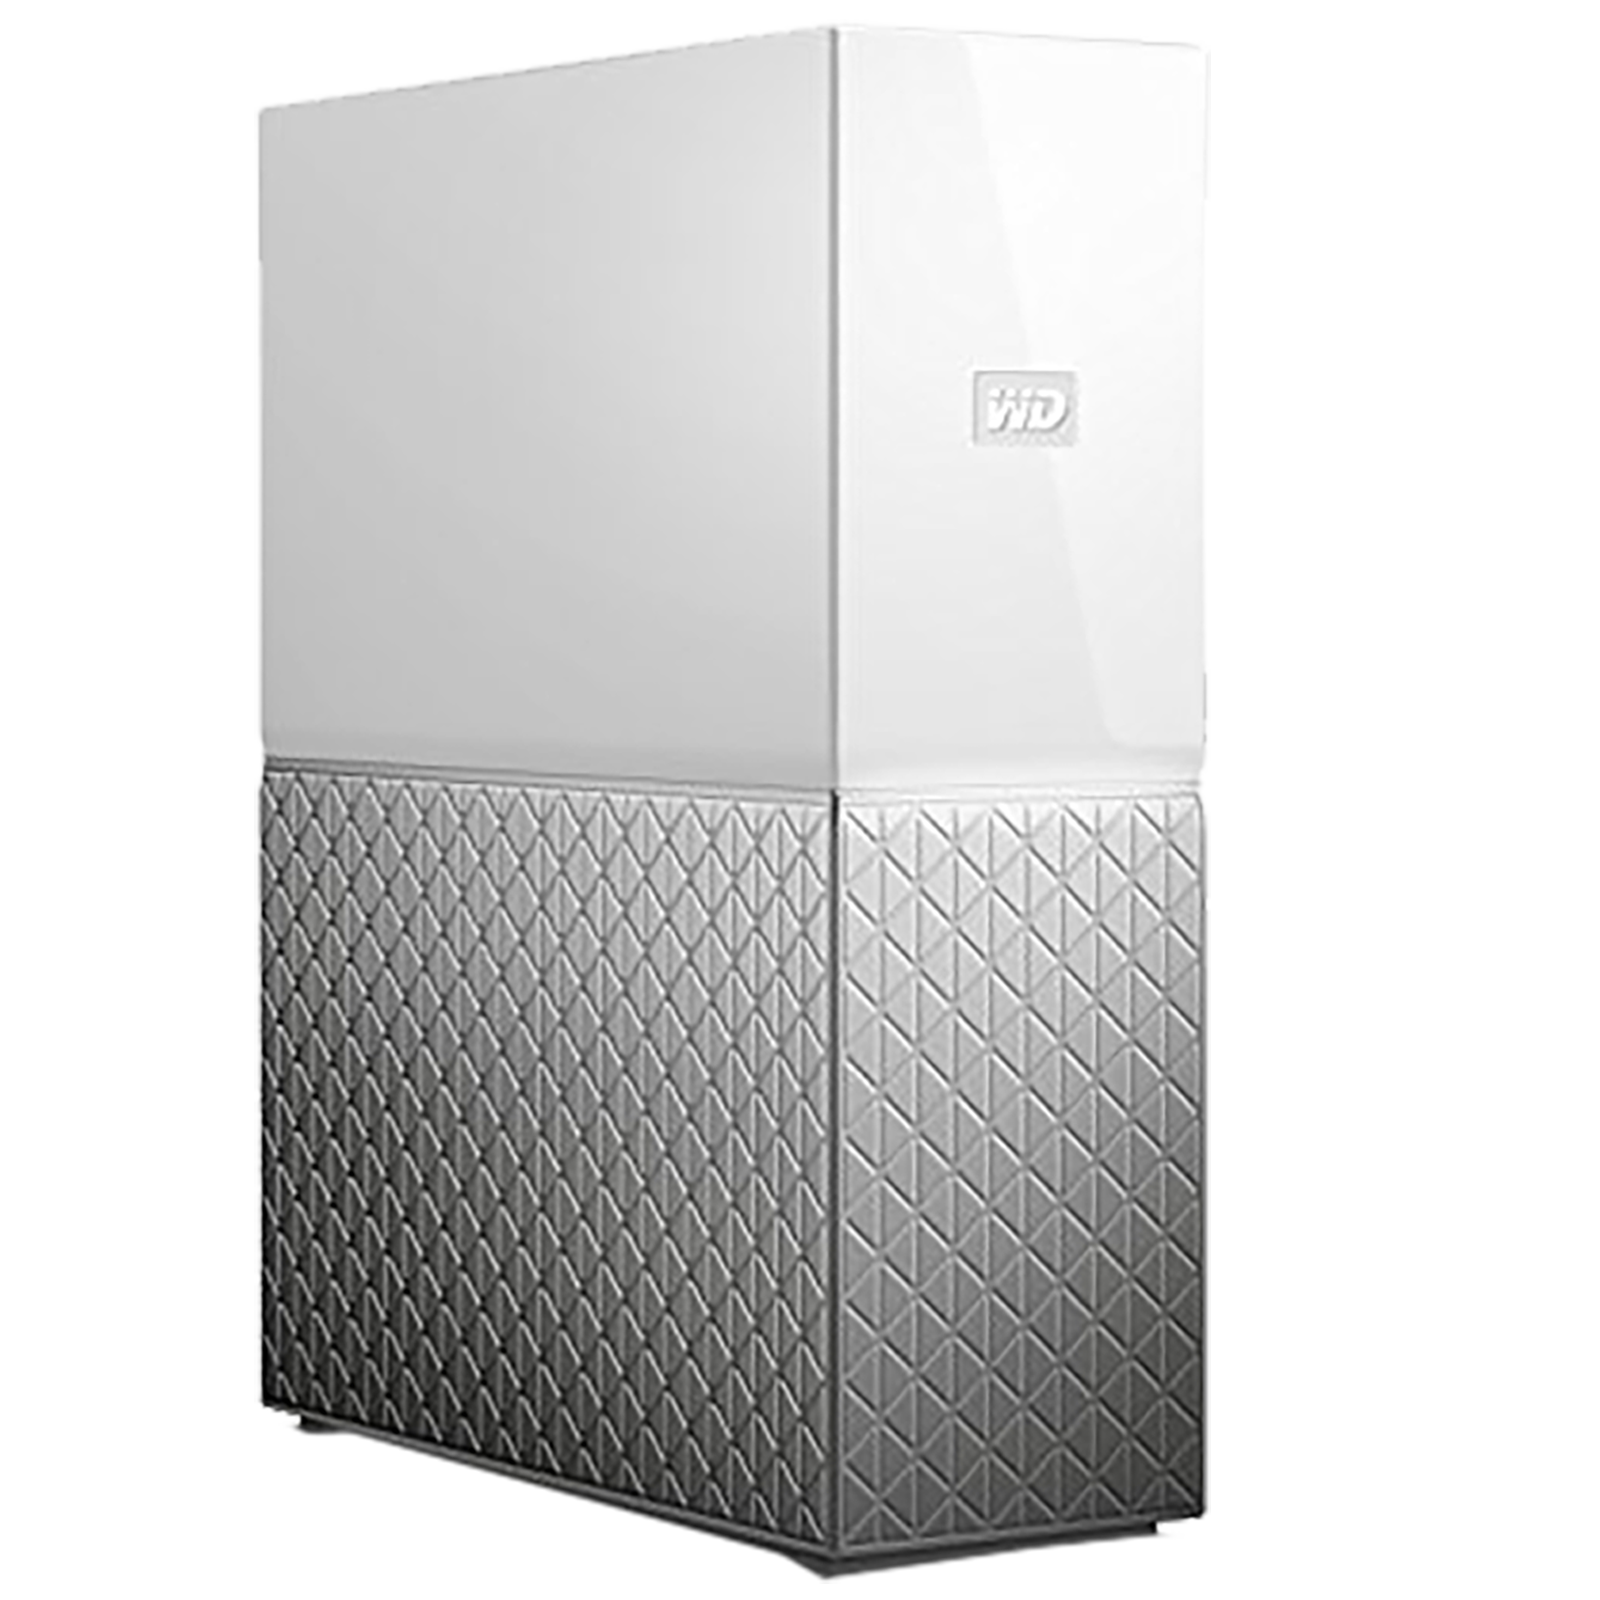 Western Digital My Cloud Home 6 TB USB 3.0 Network Attached Storage (Automatic Backup, WDBVXC0060HWT-BESN, White)_1